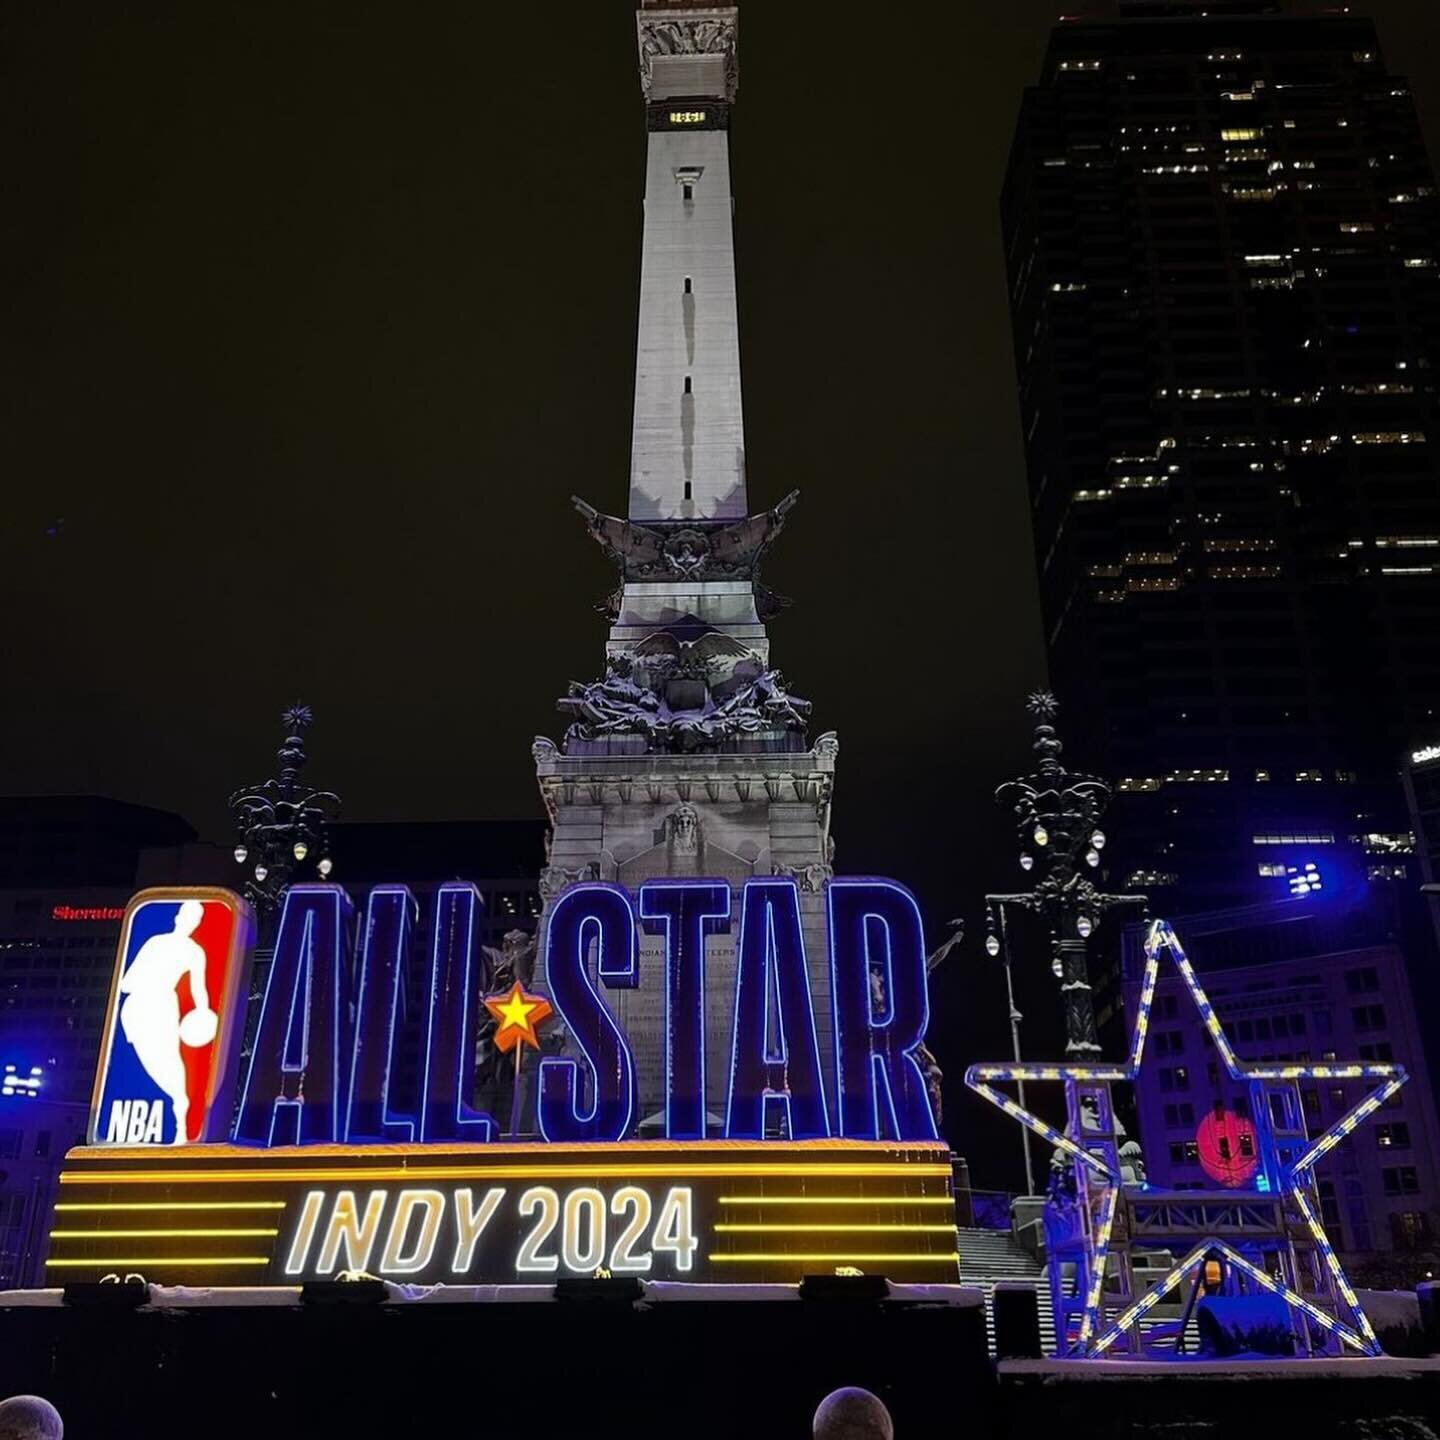 The NBA and the city of Indianapolis delivered big, memorable touchpoints and unique brand moments throughout NBA All-Star Weekend.